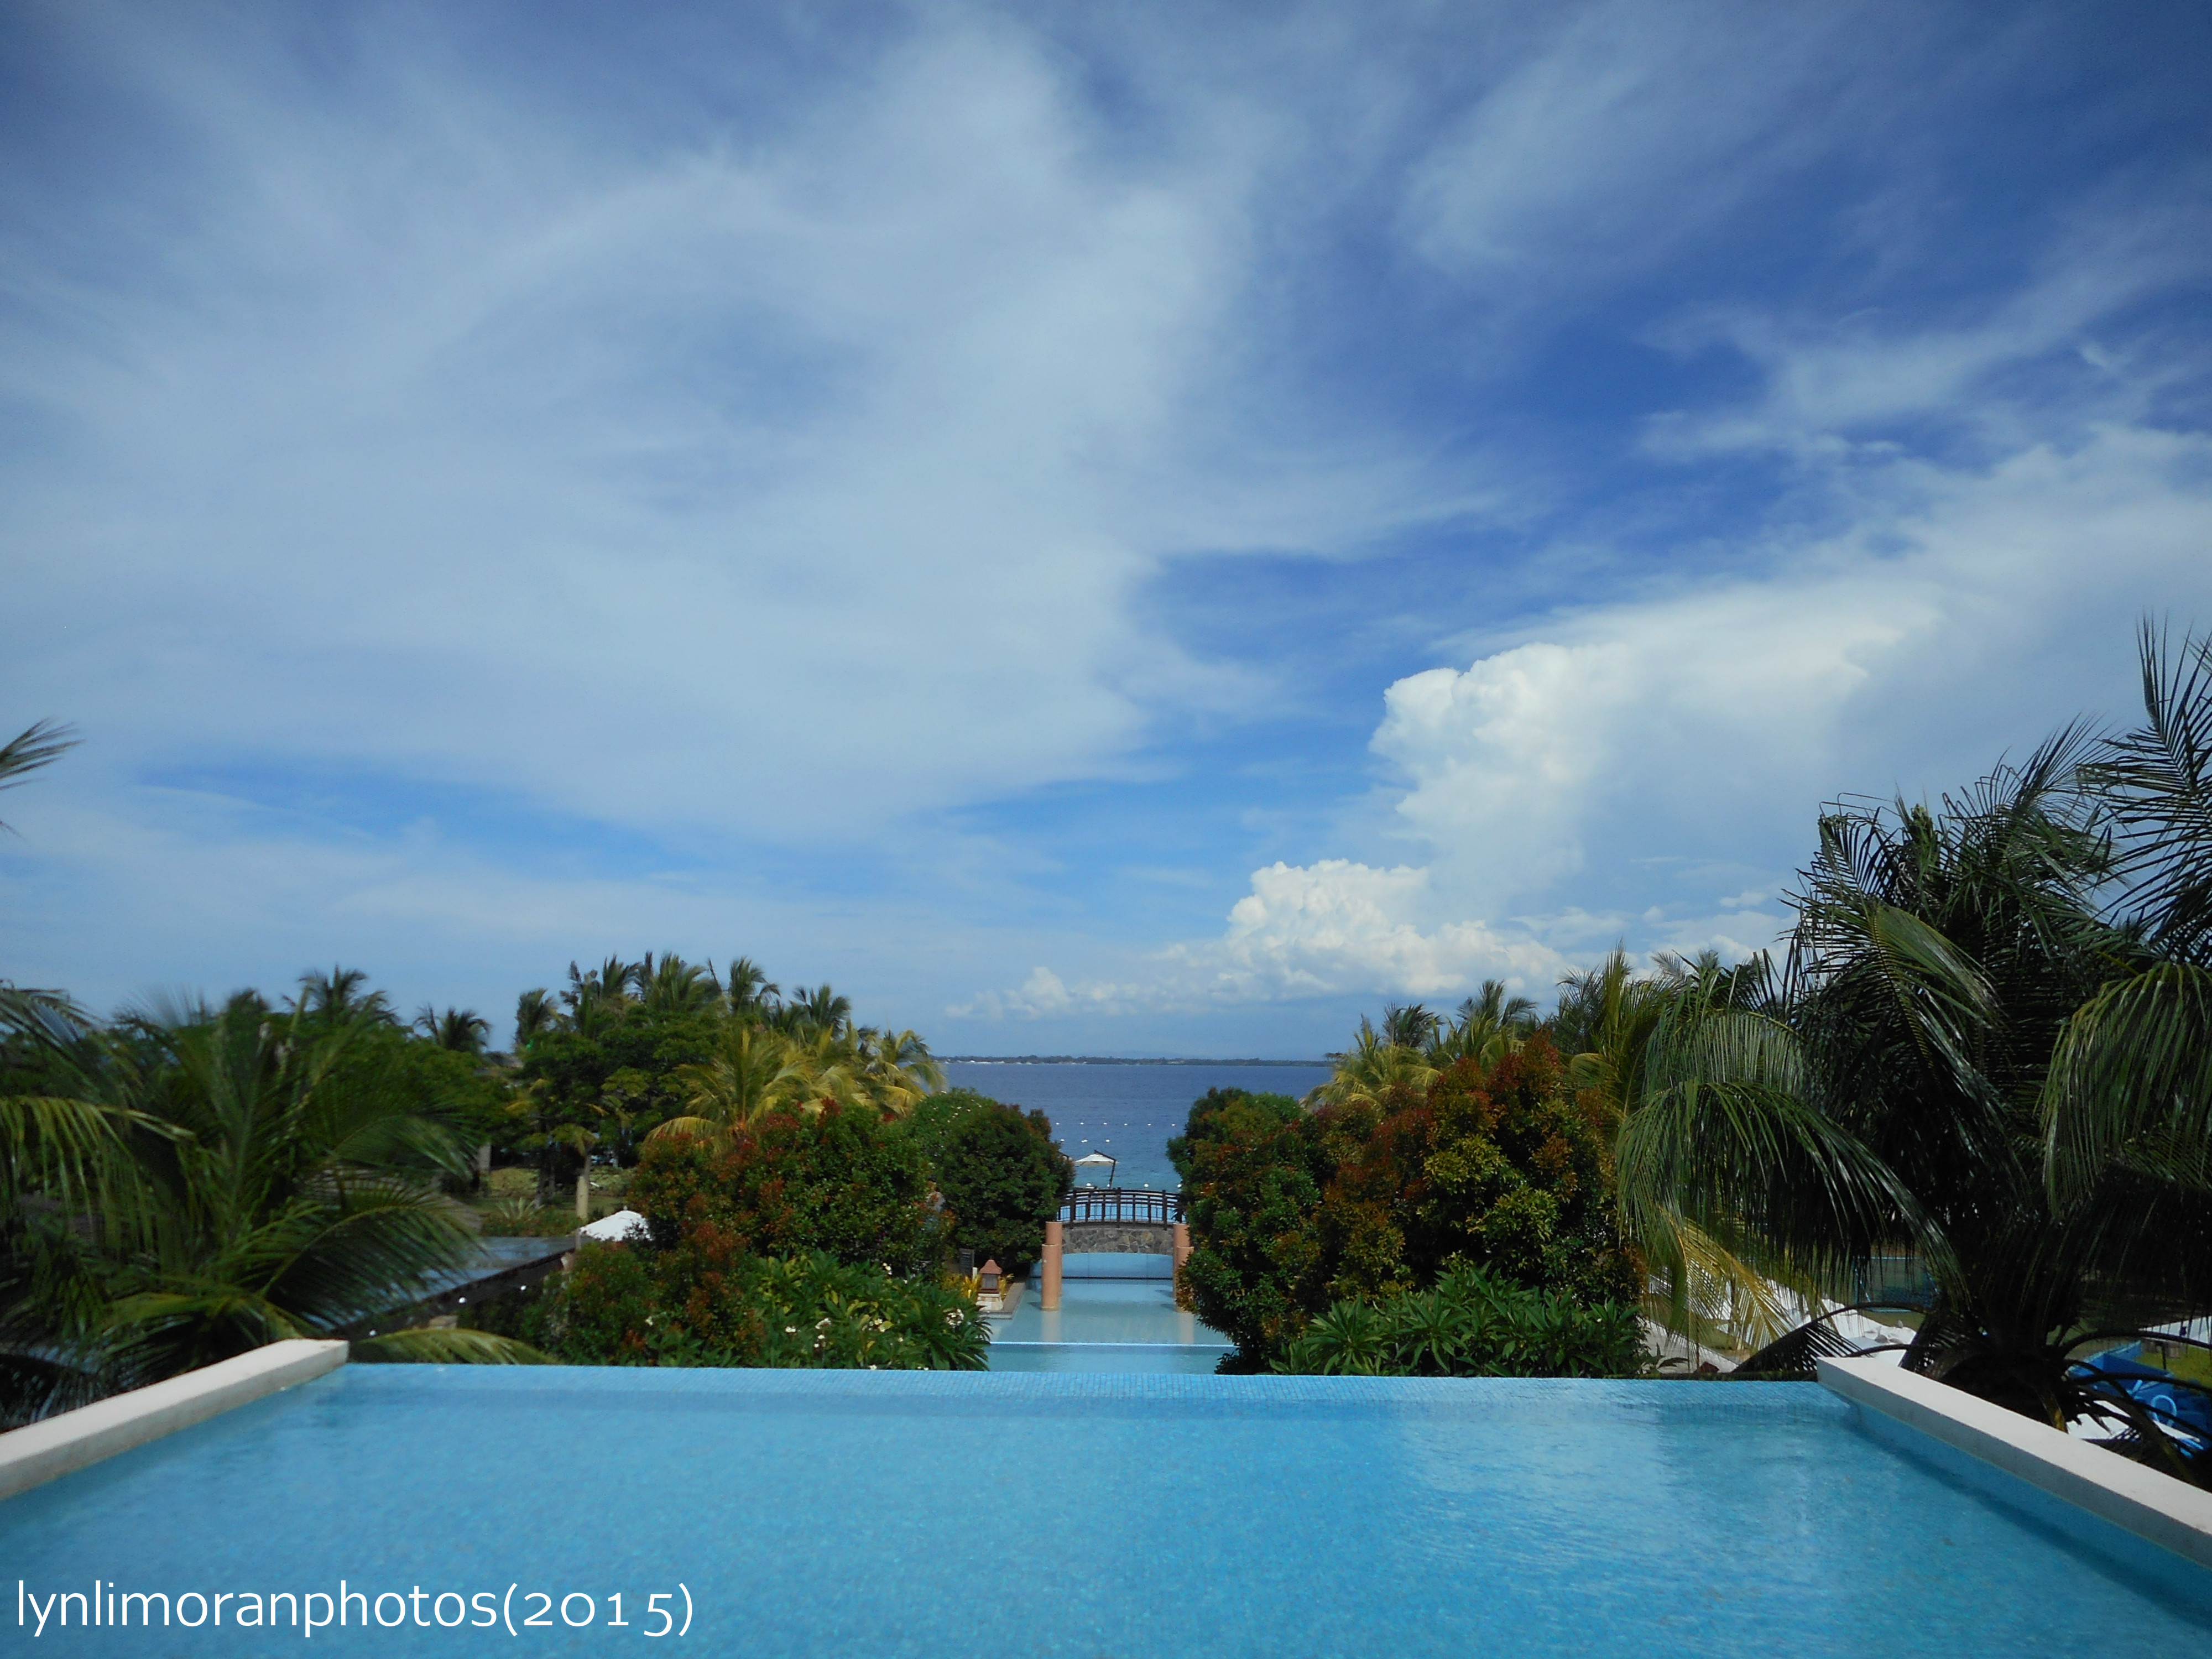 The breathtaking view of the ocean and a part of the resort’s premises.